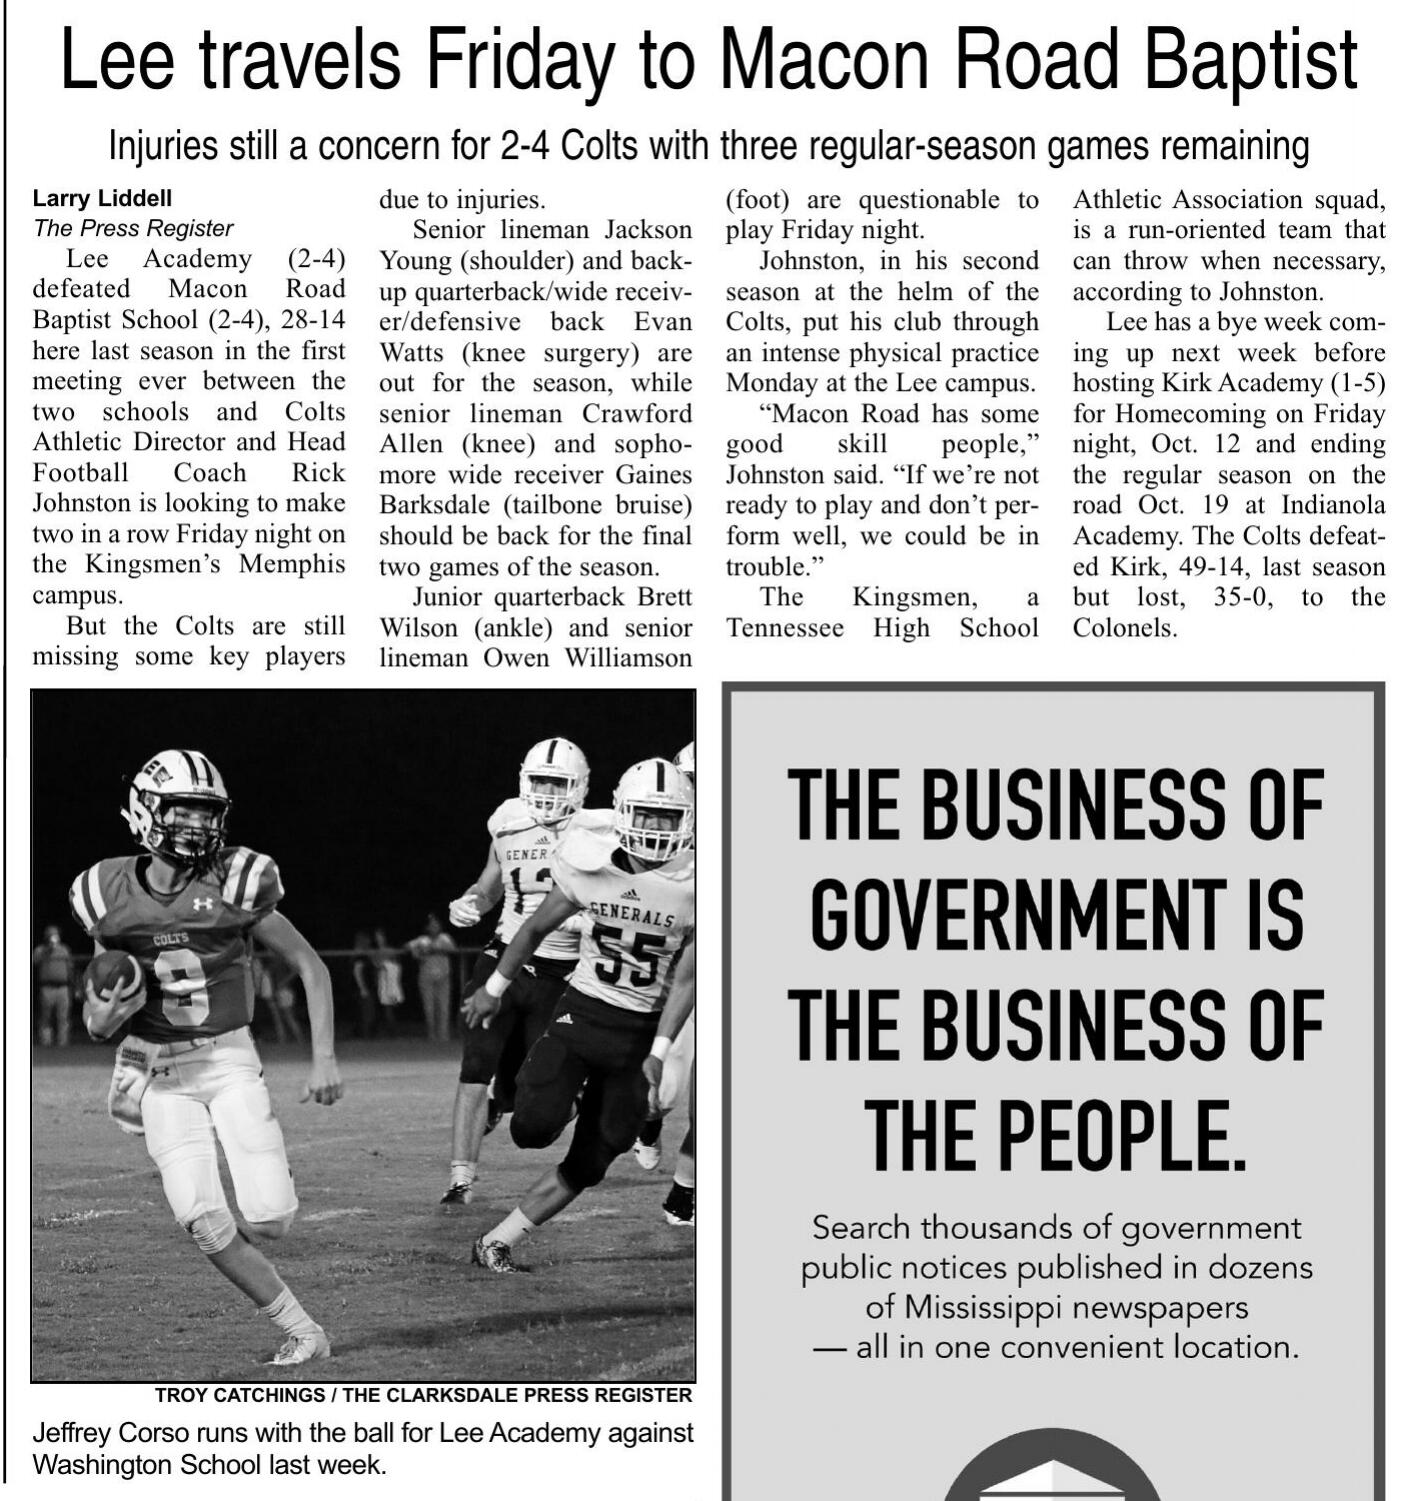 Lee travels to Macon Road Baptist this Friday